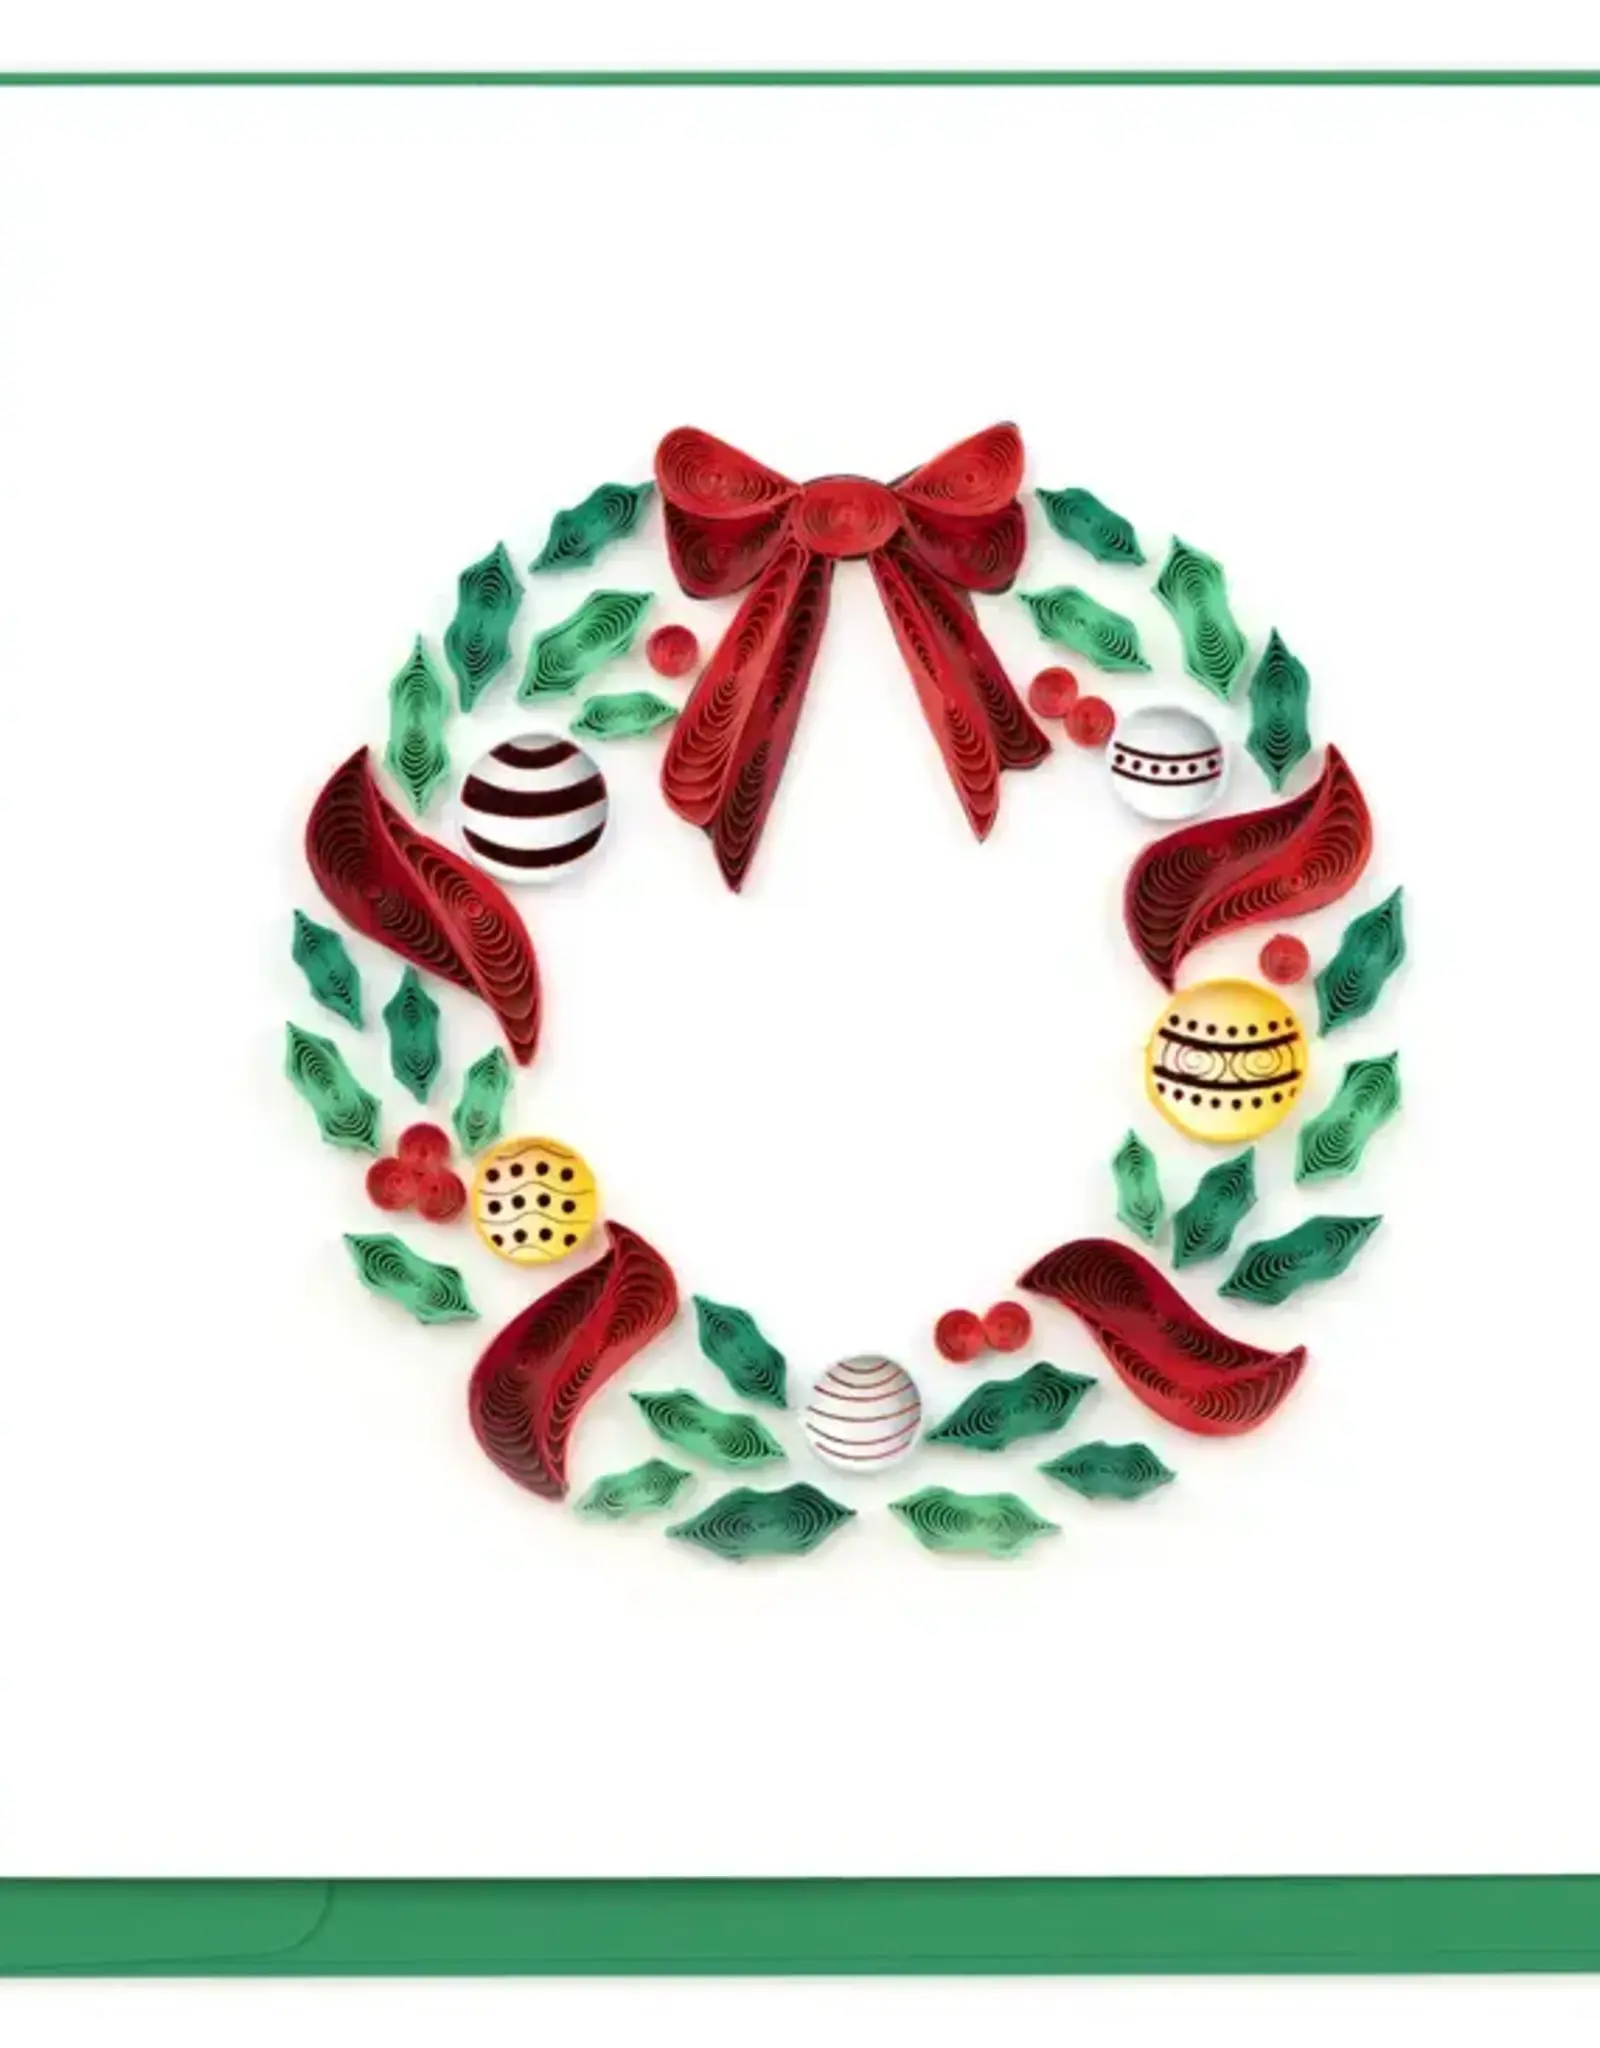 Quilling Card Quilled Holiday Wreath with Ornaments Greeting Card